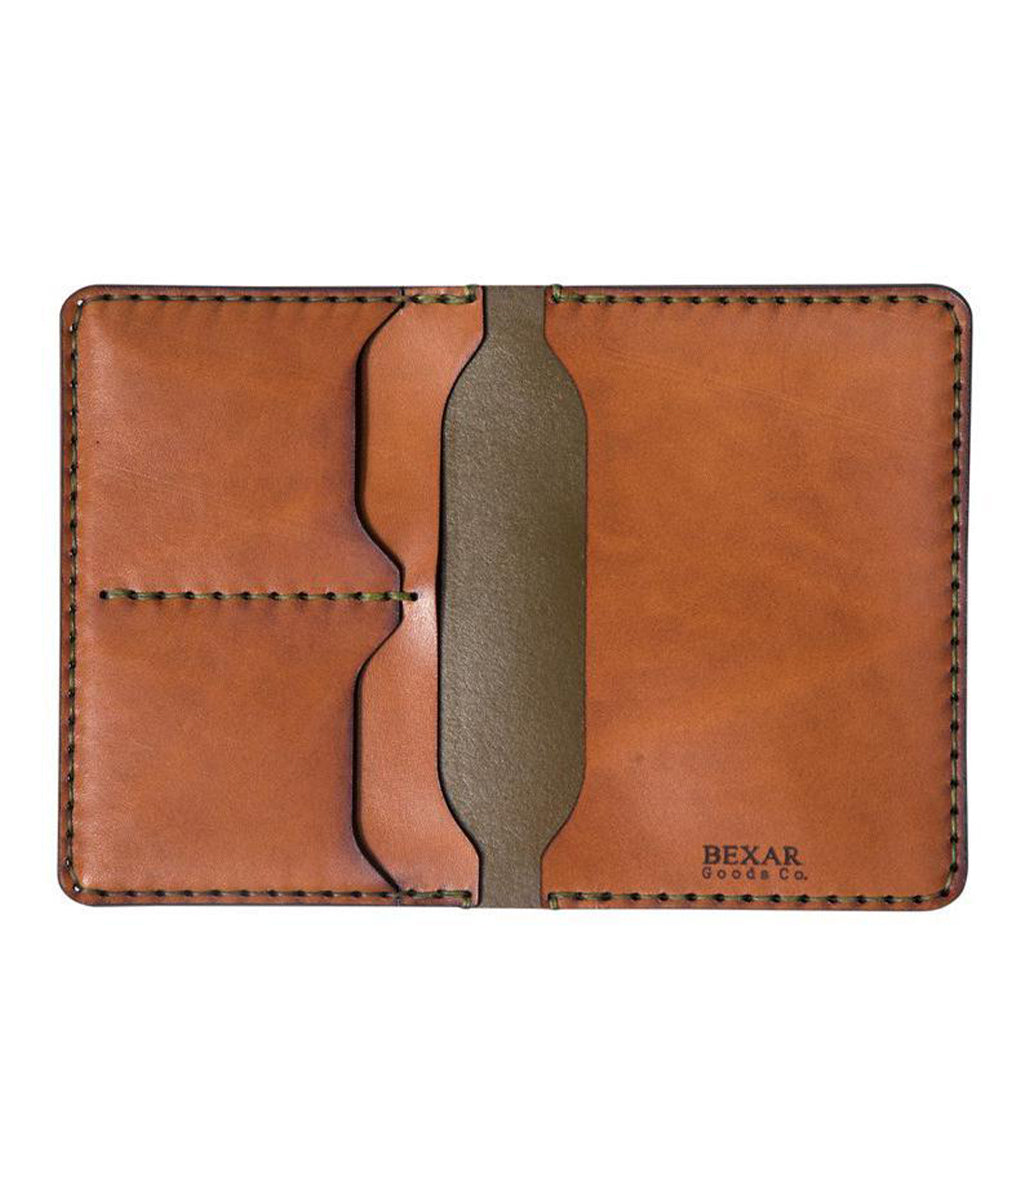 green outer and brown inner leather passport wallet with two card pockets